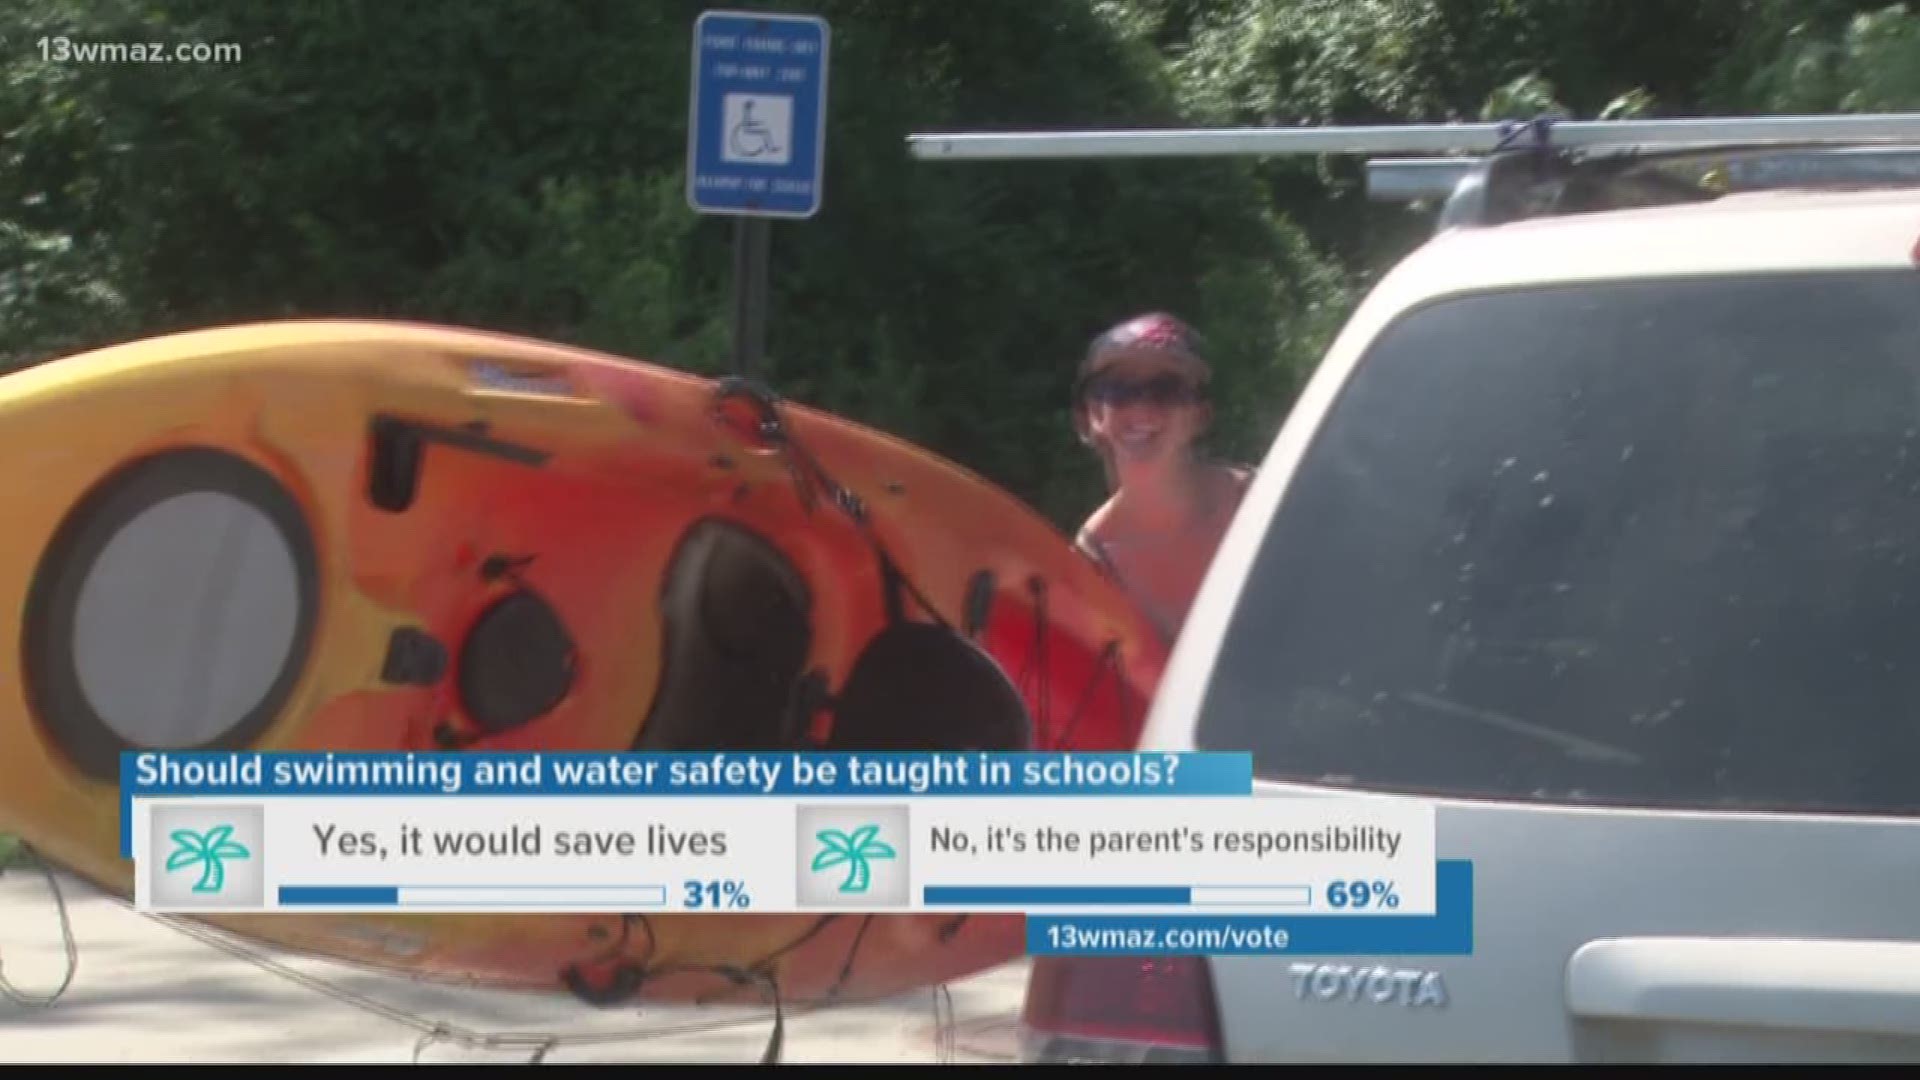 Ways to stay safe in kayaks and canoes